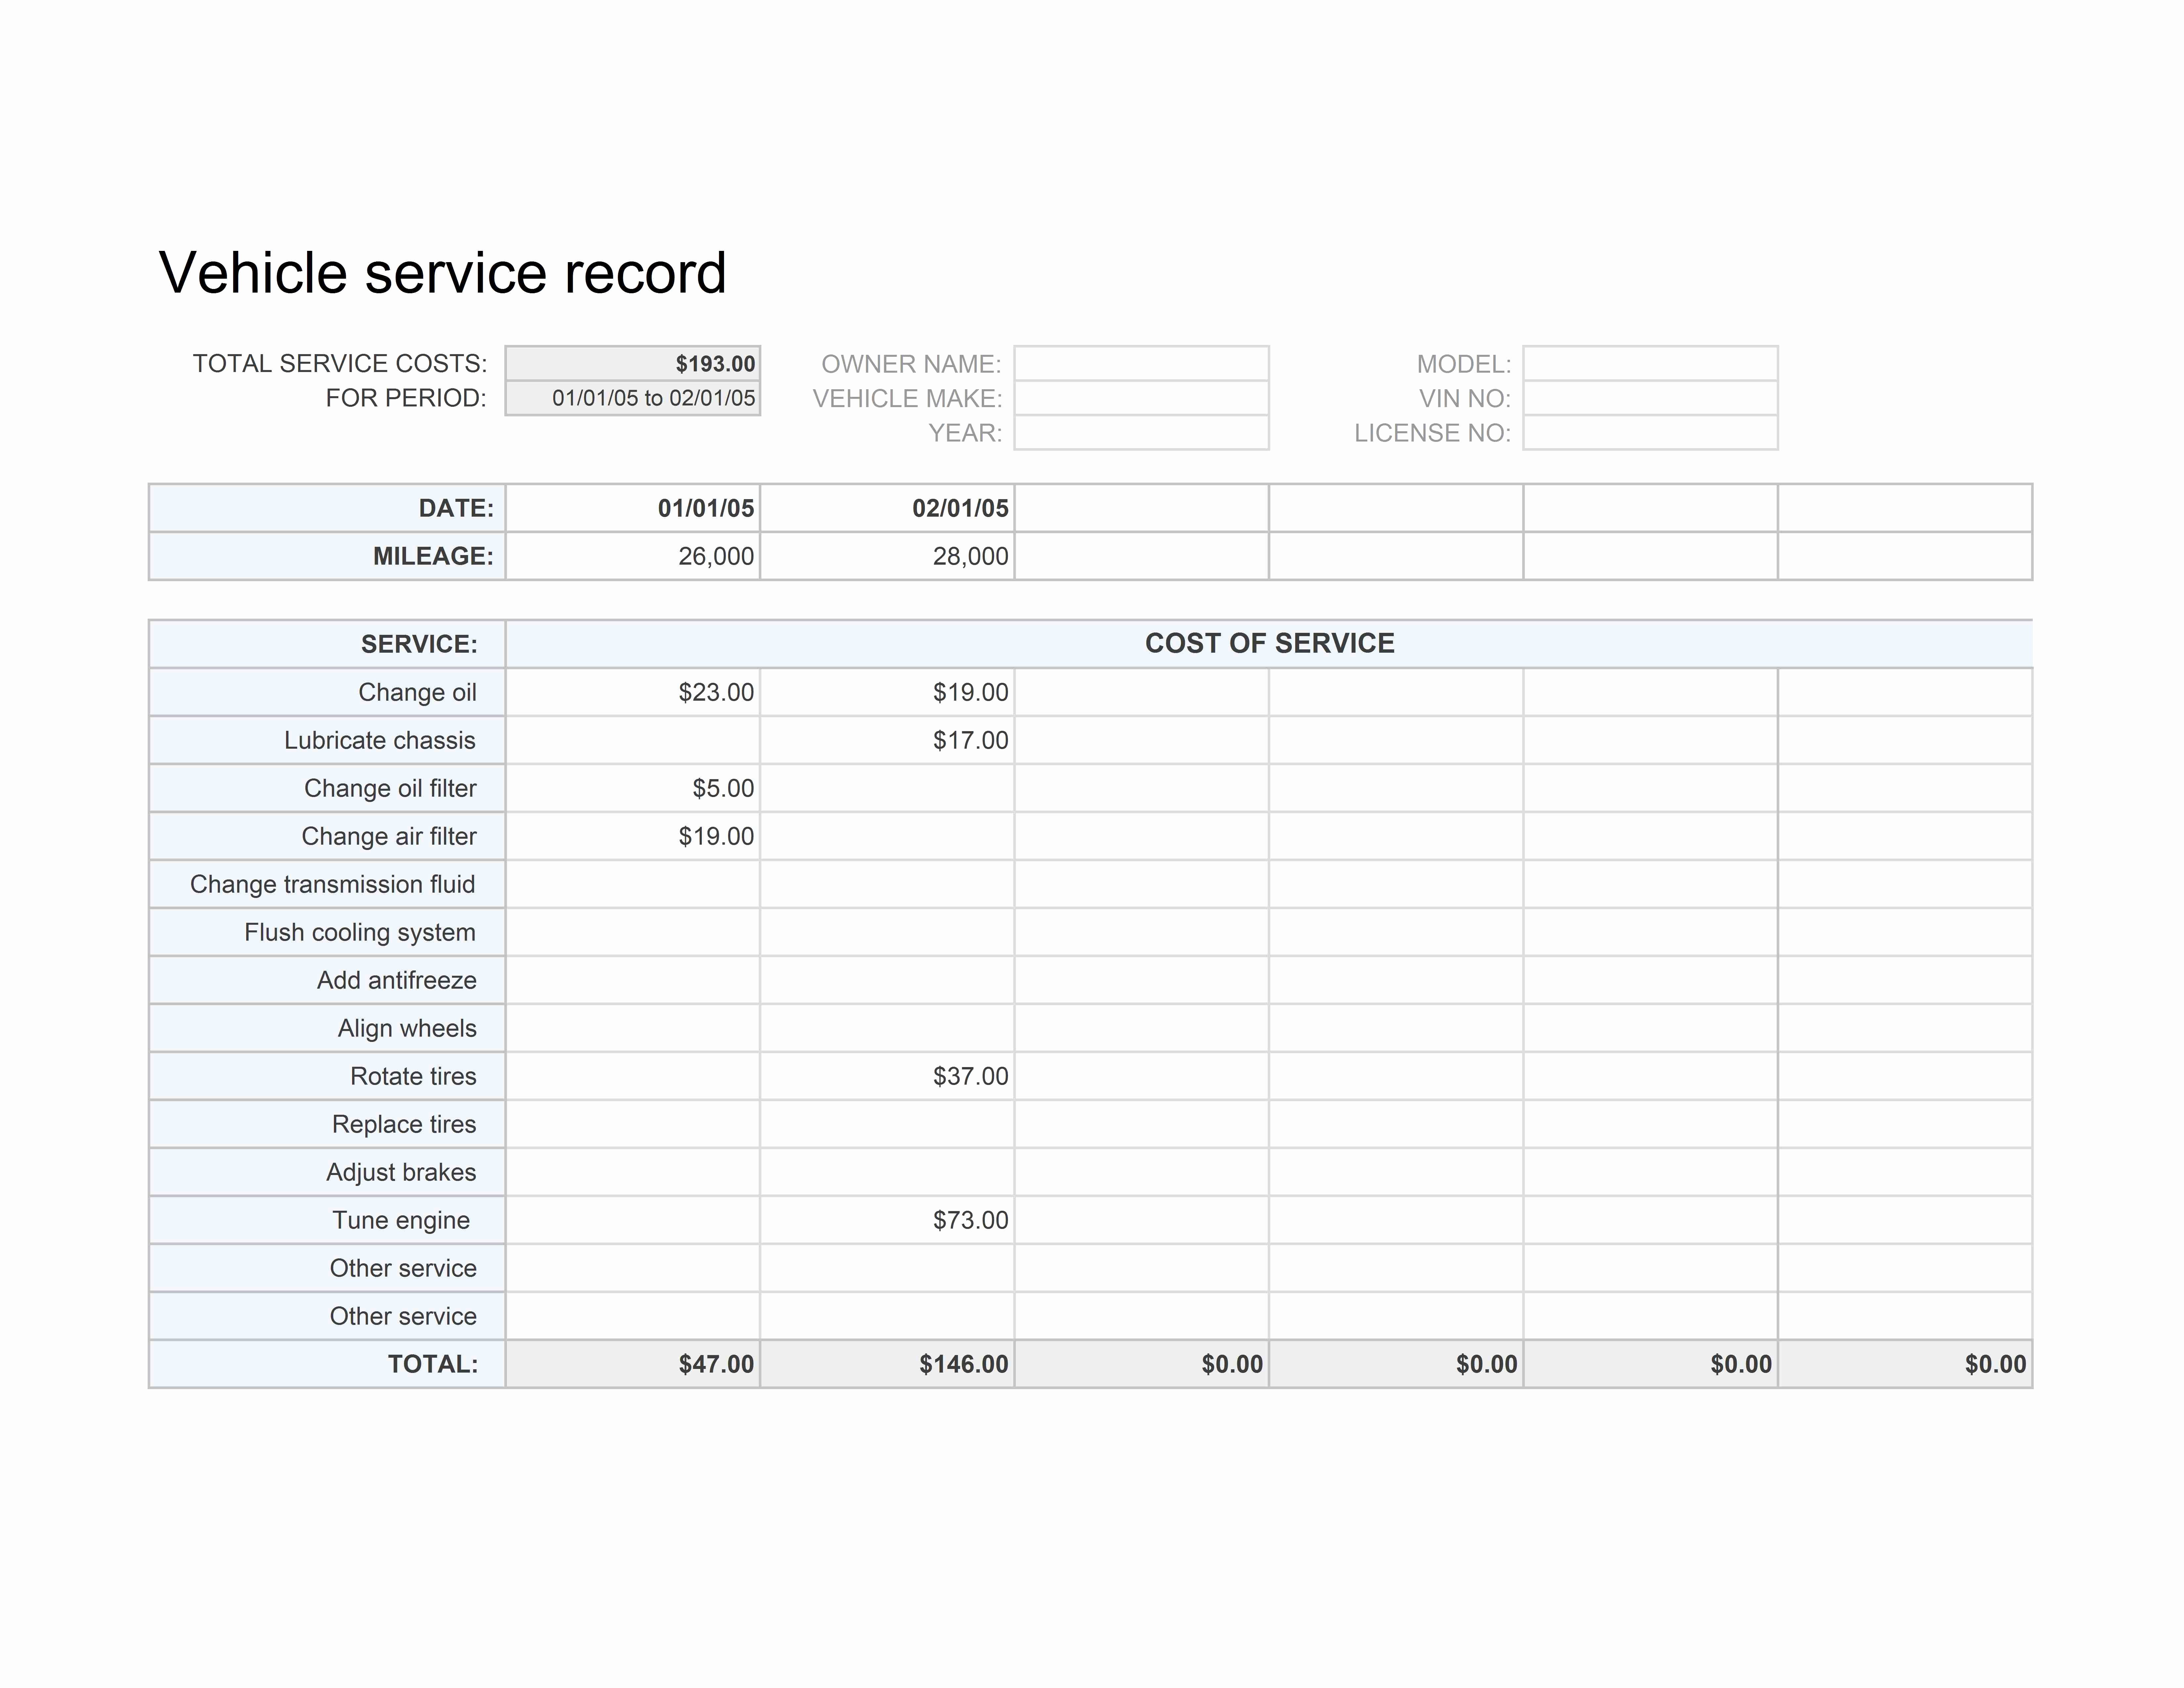 Vehicle Maintenance Log Excel Template Best Of Vehicle Service Record Template